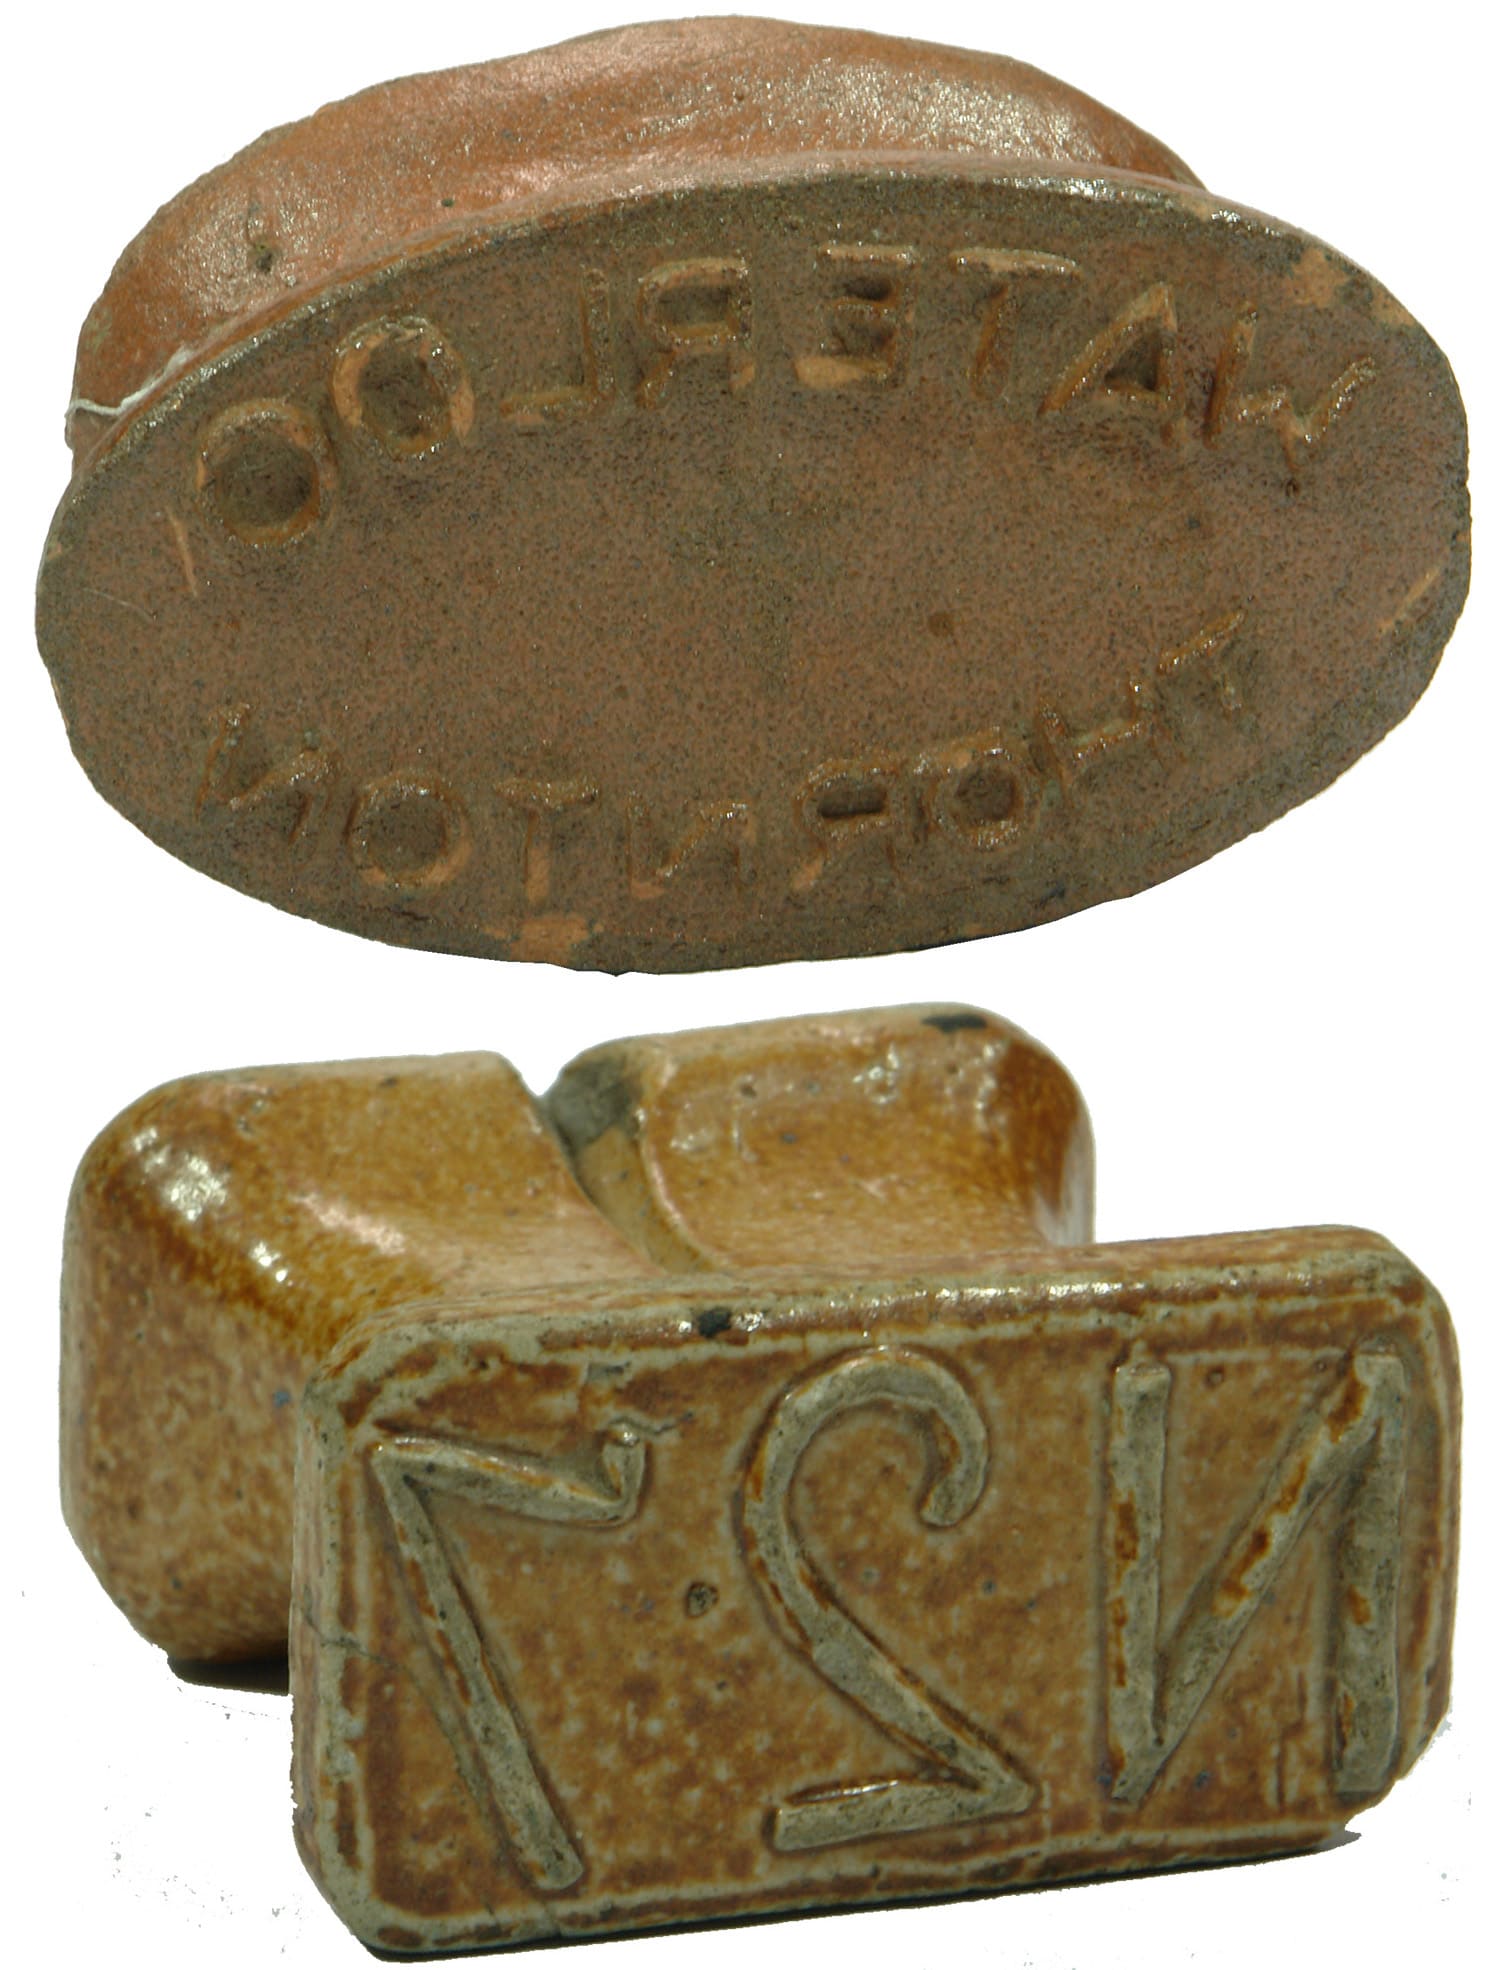 Potters Stamps Waterloo Fire Brick Company